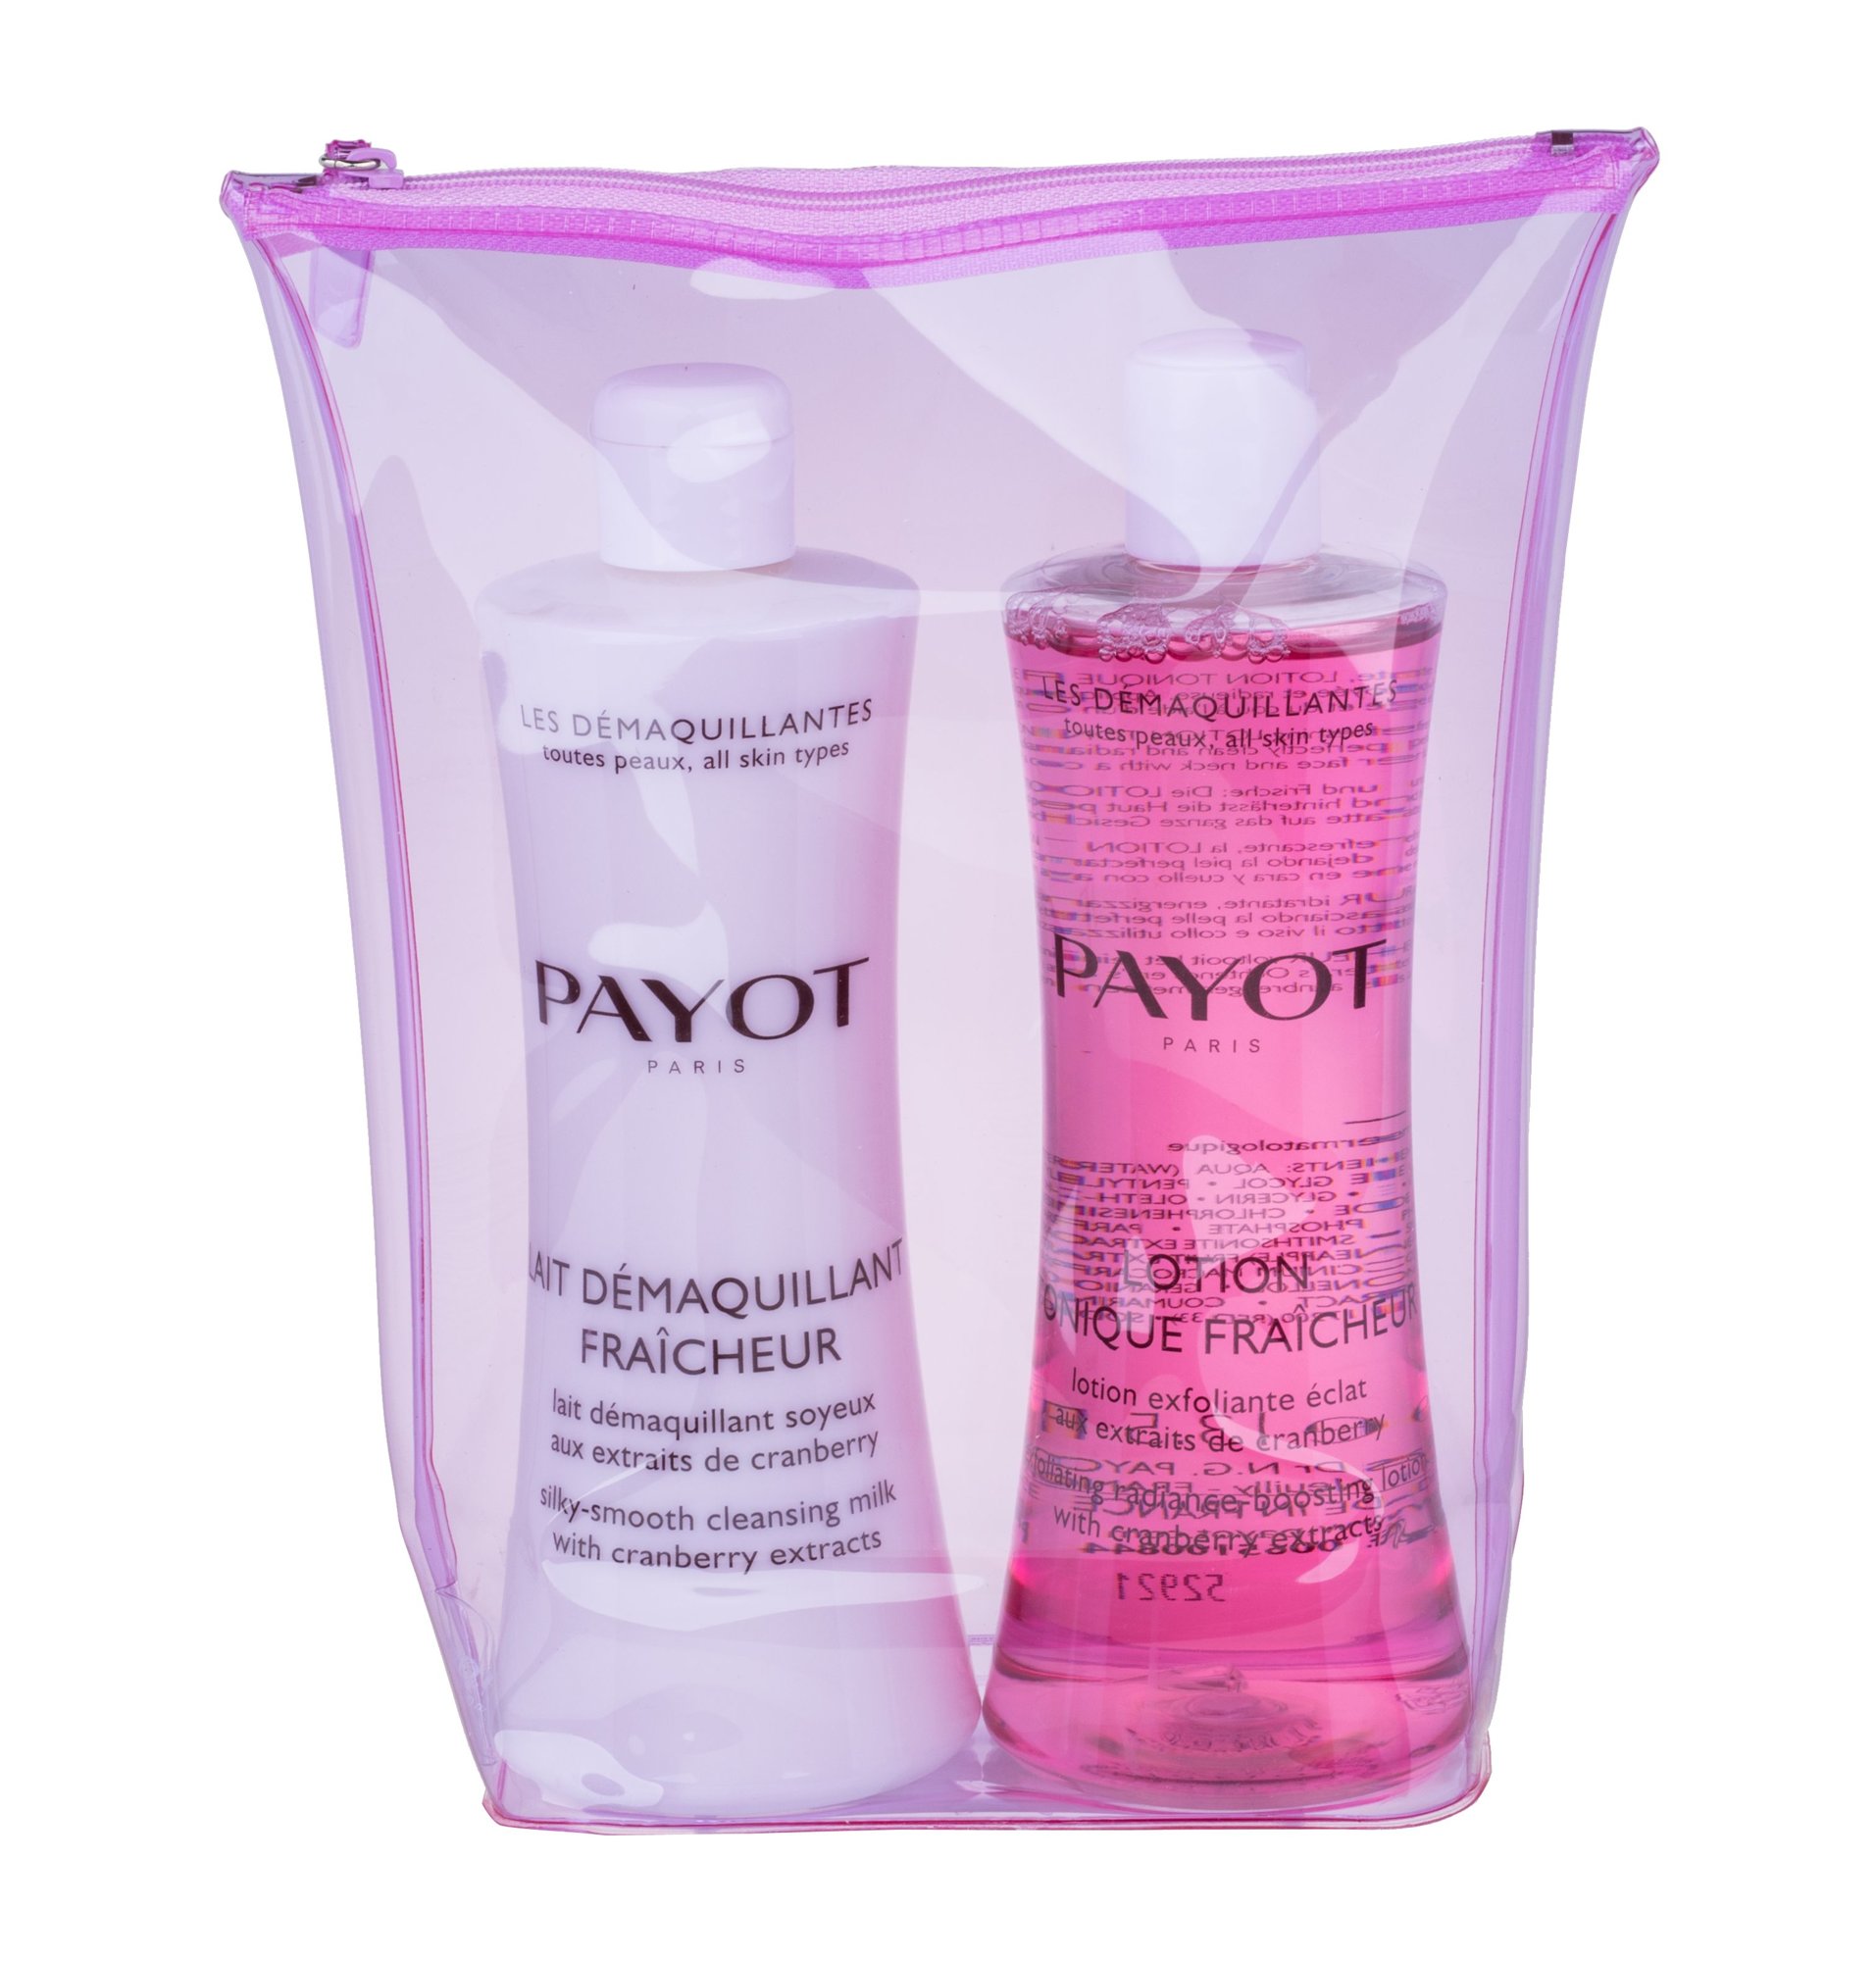 Payot Les Démaquillantes 400ml Silky Smooth Cleansing Milk 400 ml + Exfoliating Radiance-Boosting Lotion 400 ml + Cosmetic Bag veido valiklis Rinkinys